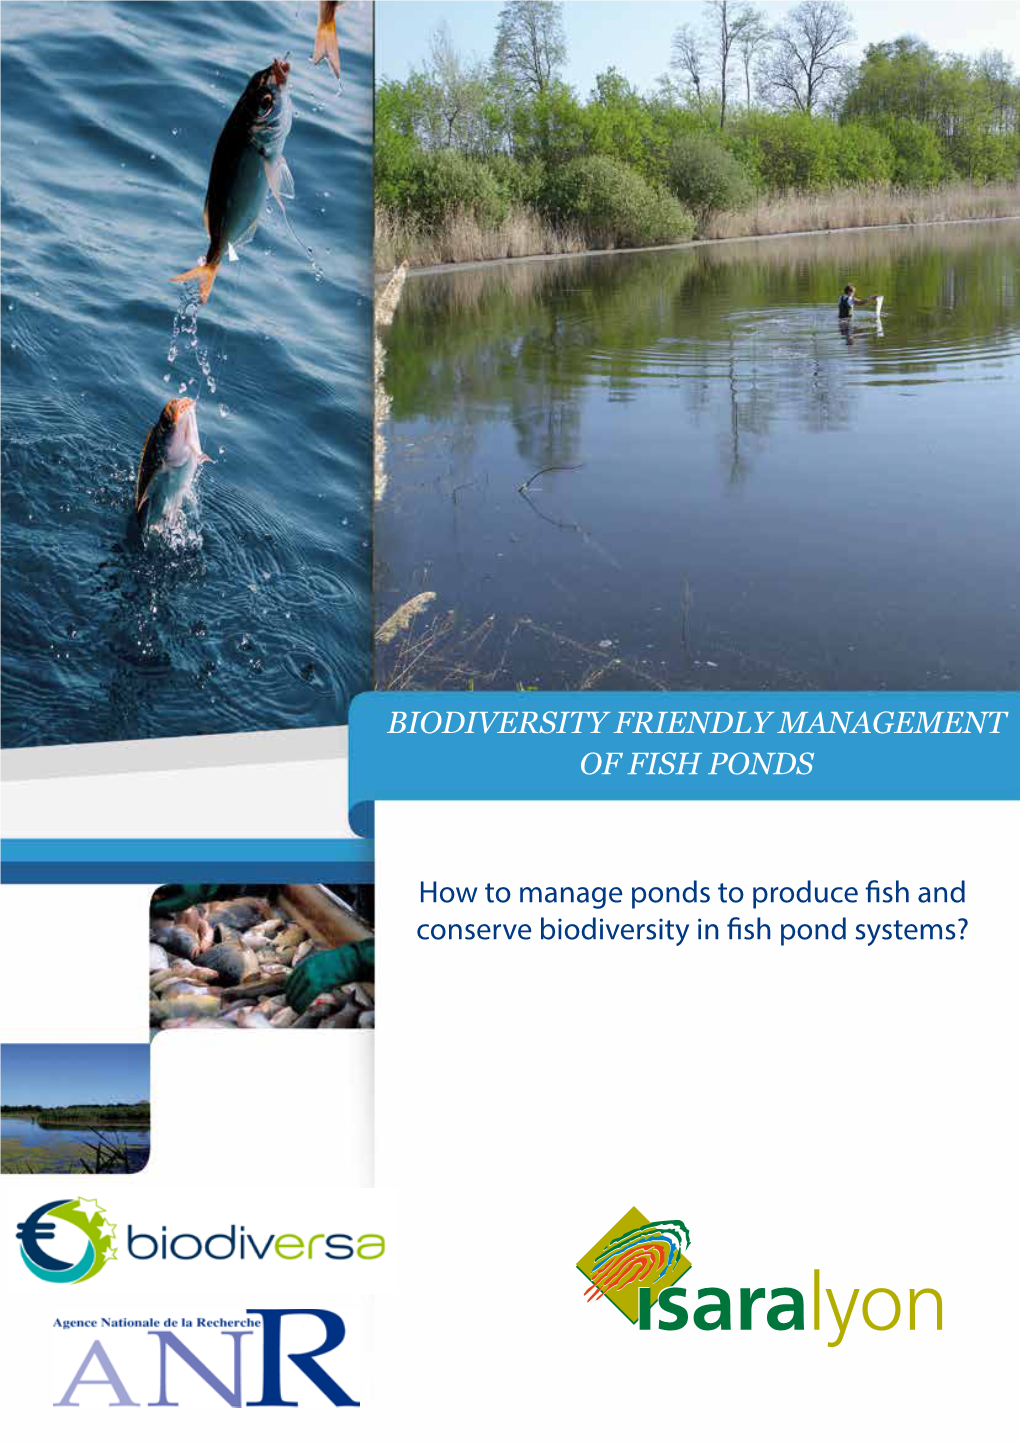 BIODIVERSITY FRIENDLY MANAGEMENT of FISH PONDS How to Manage Ponds to Produce Fish and Conserve Biodiversity in Fish Pond System